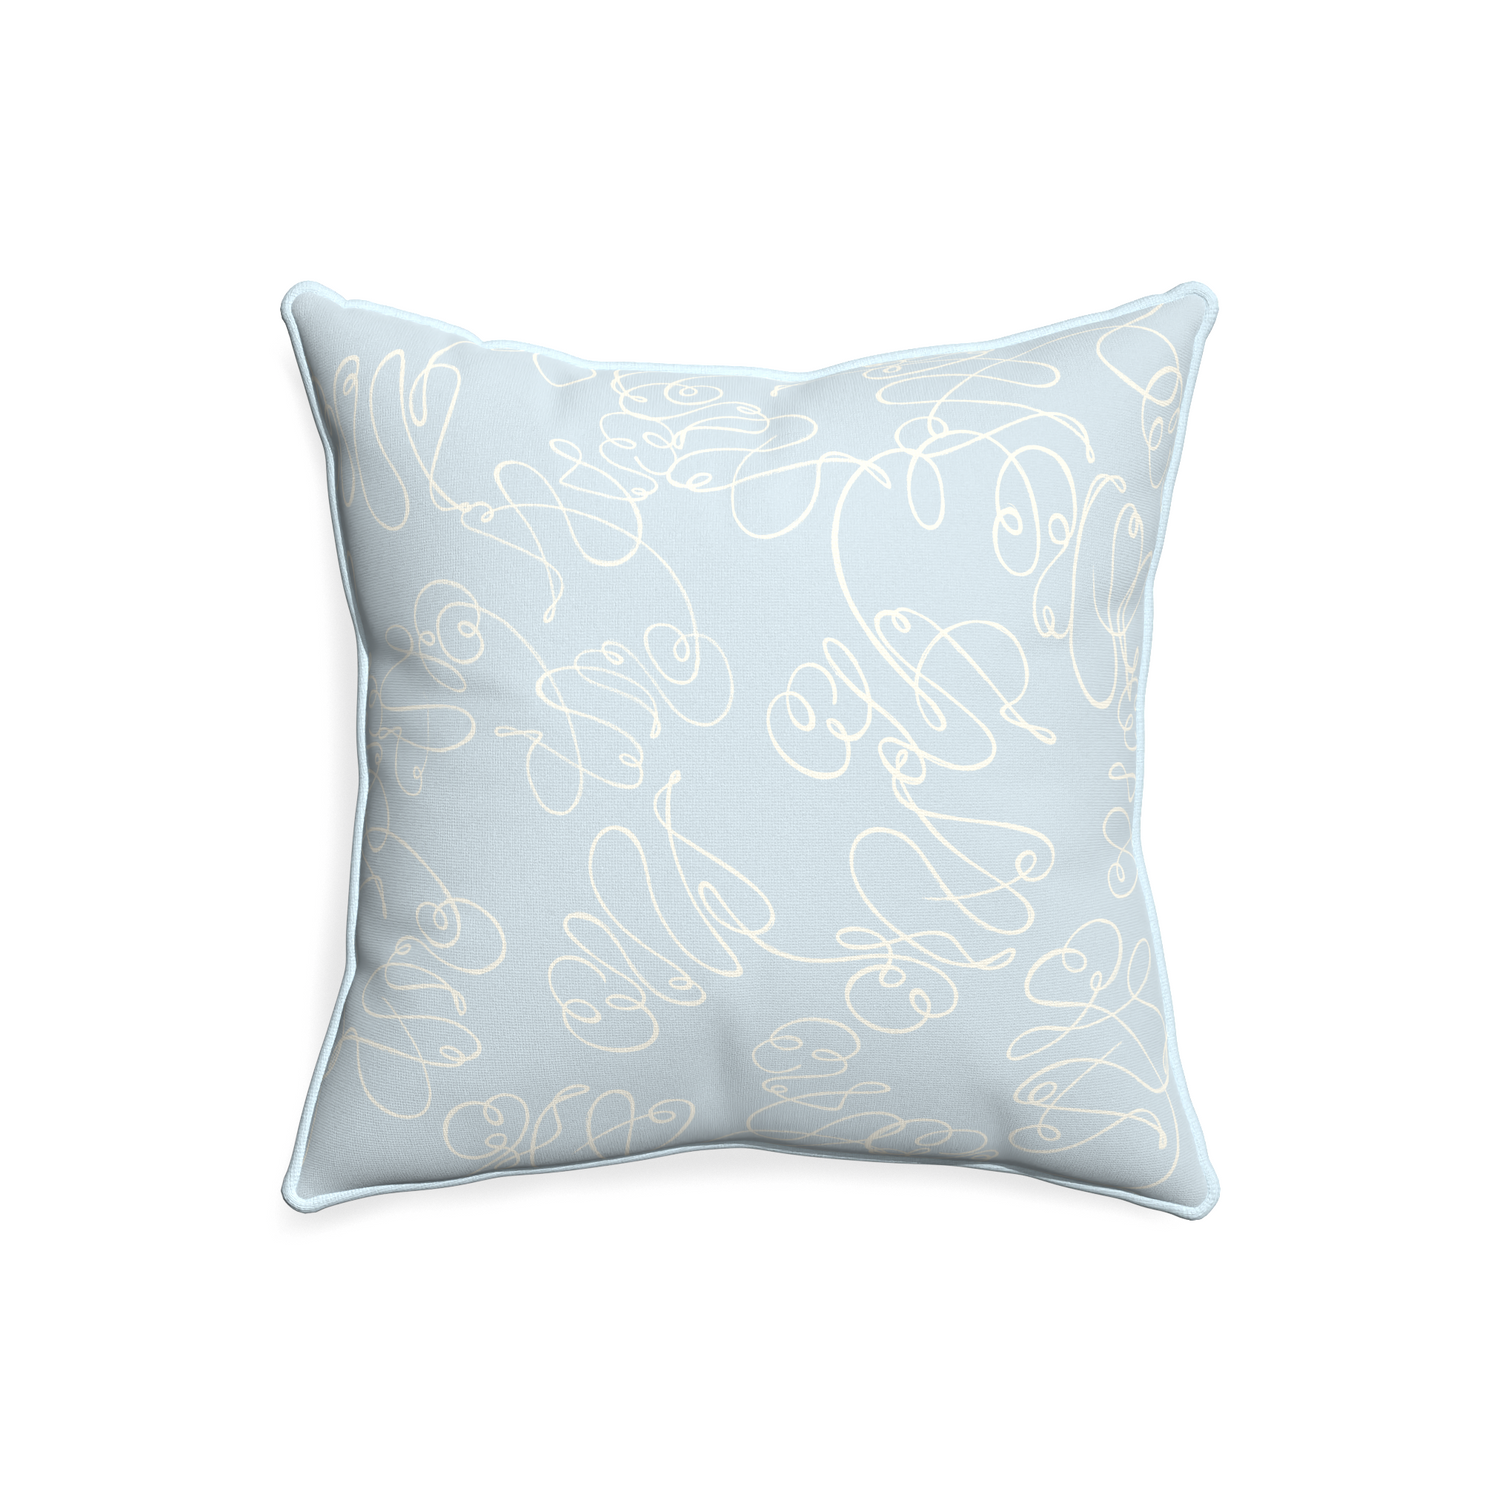 20-square mirabella custom powder blue abstractpillow with powder piping on white background